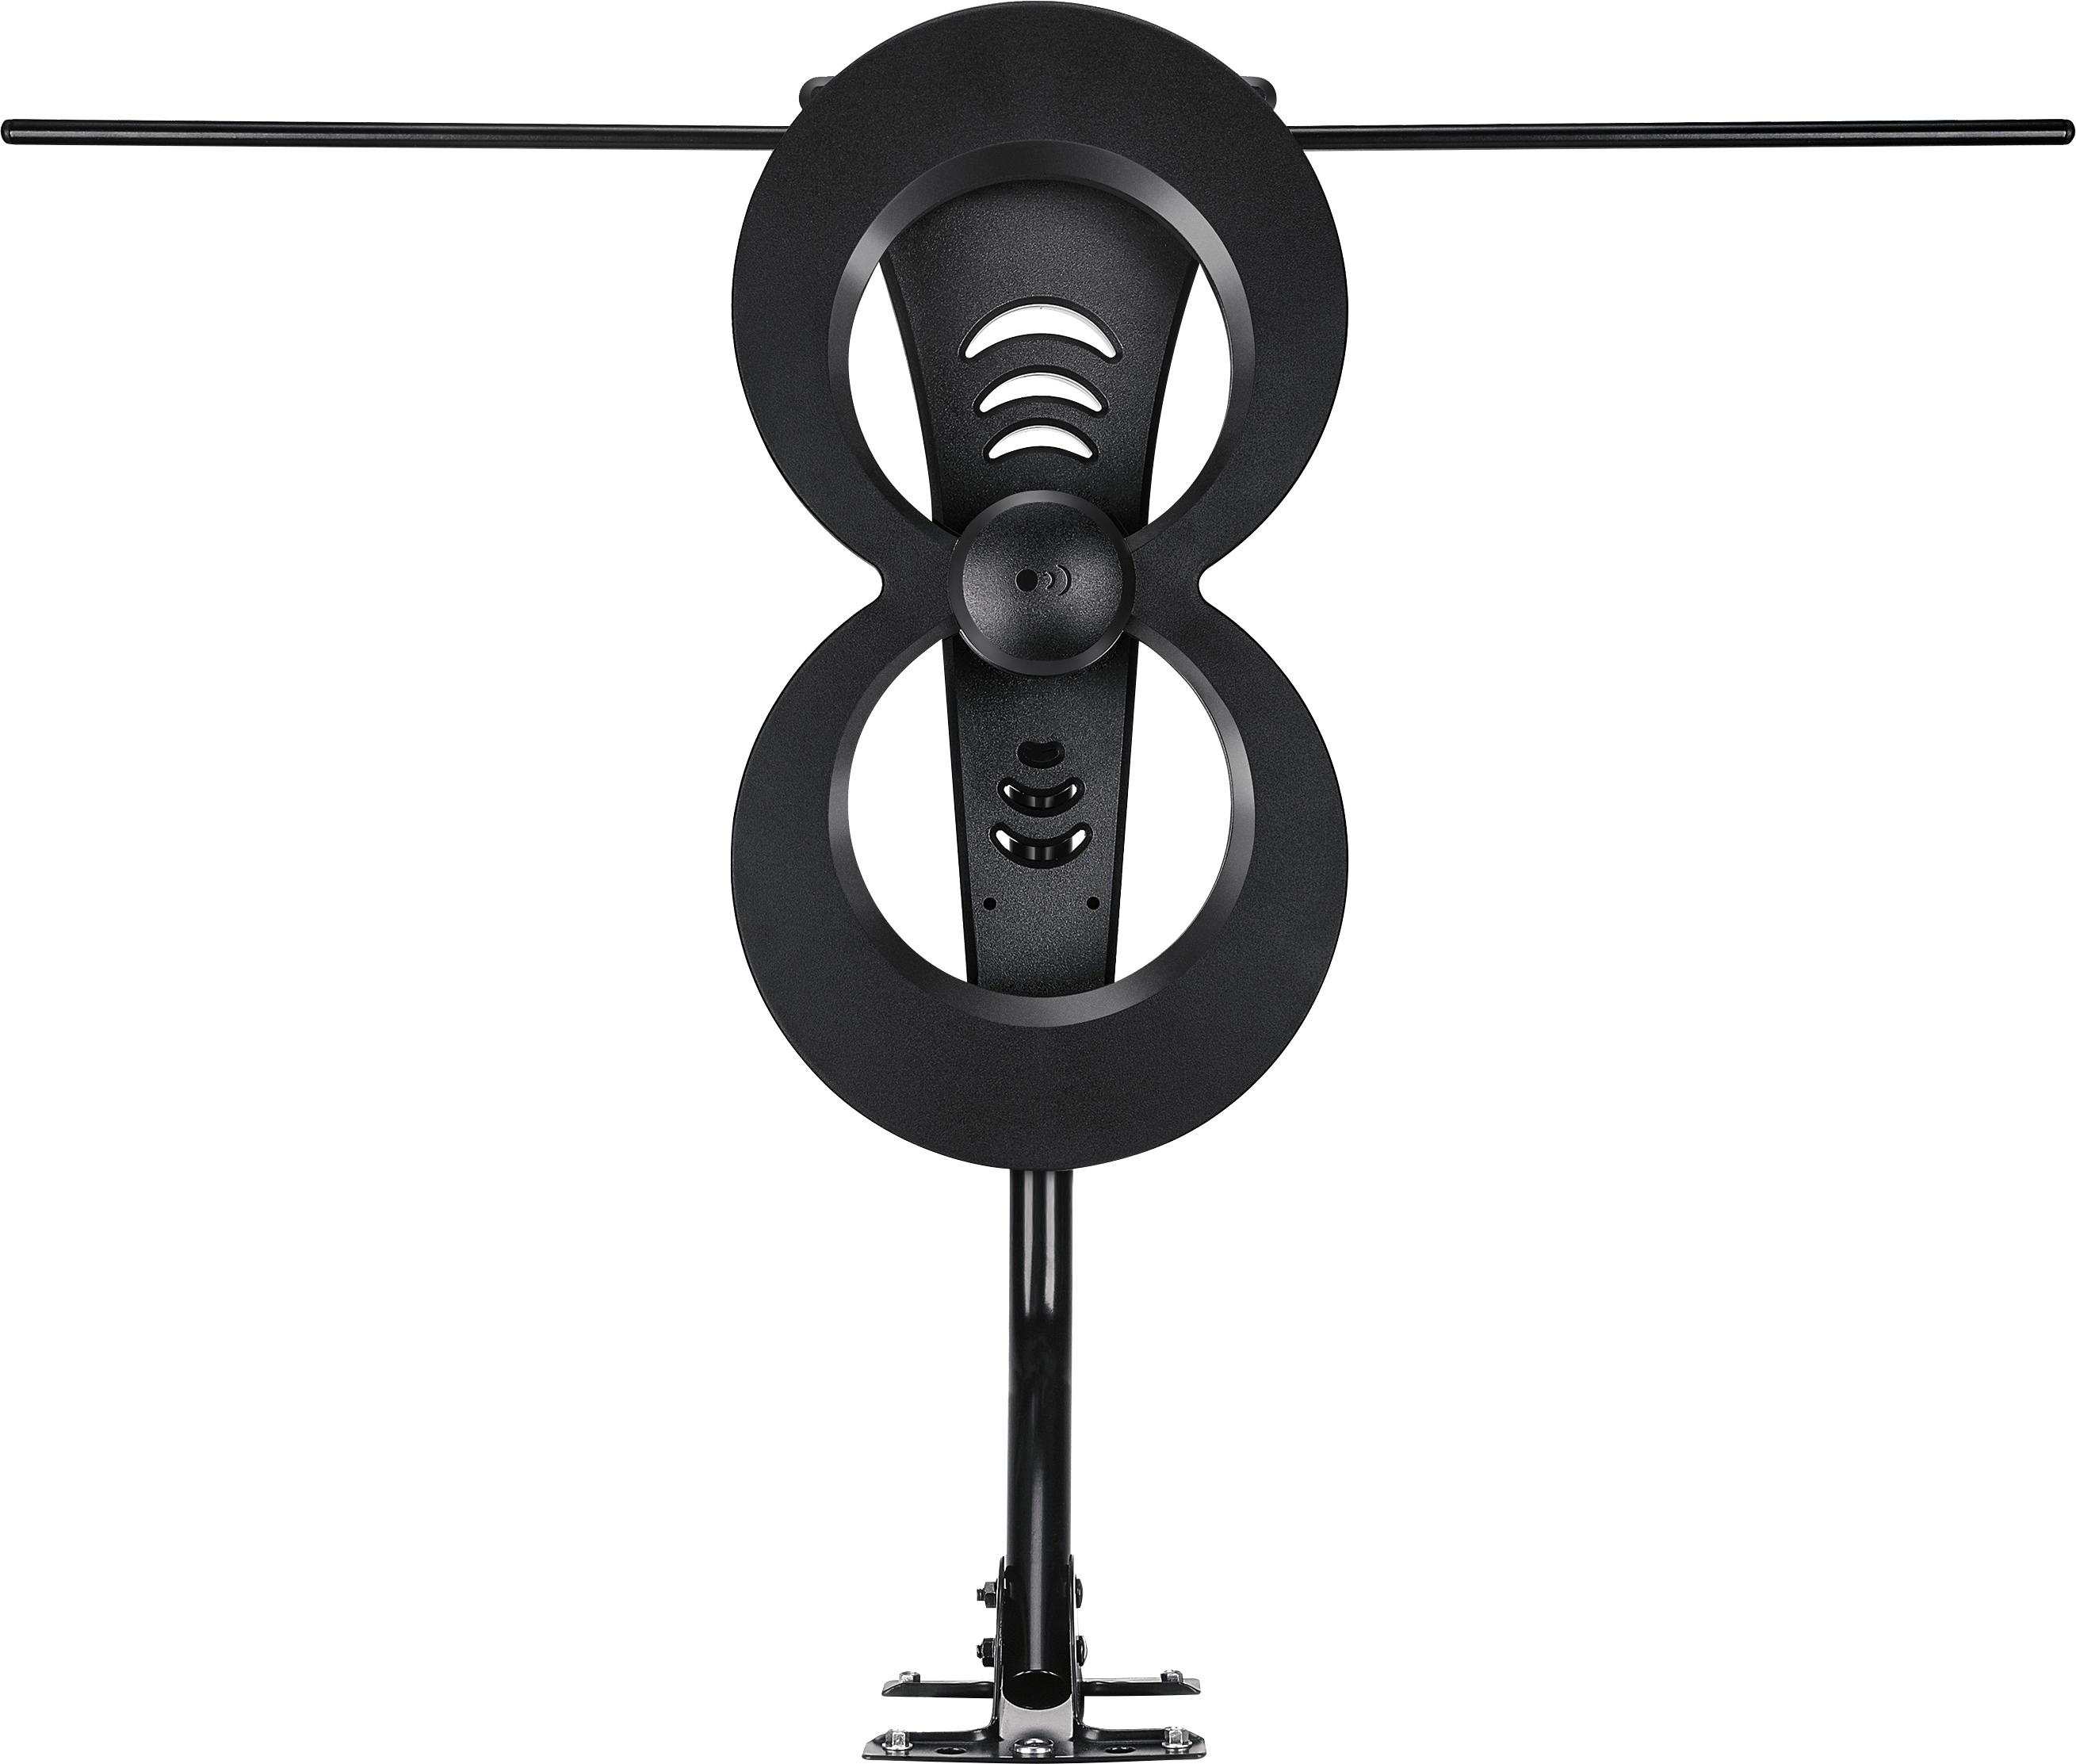 How to Buy a Hdtv Antenna? 